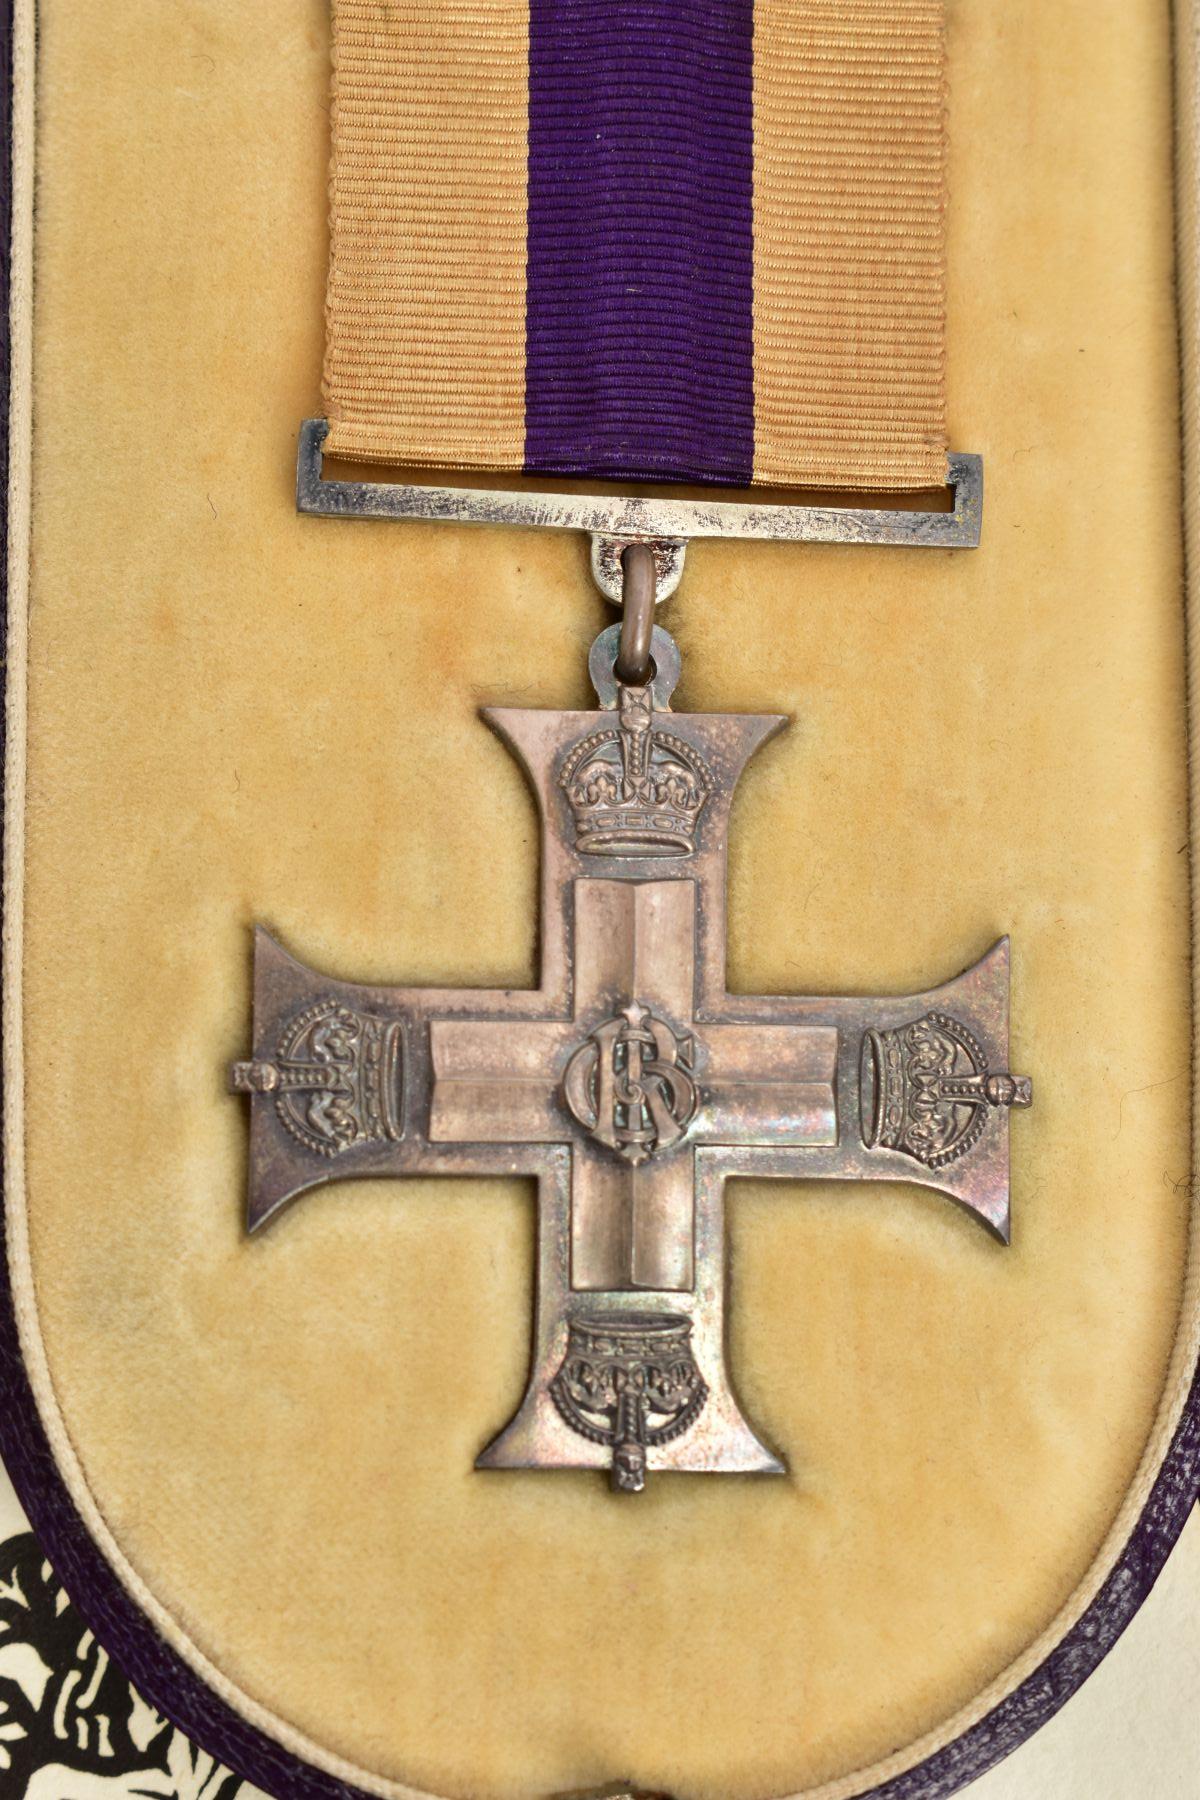 THE GREAT WAR DSO, MC, DOUBLE GALLANTRY GROUP OF SIX MEDALS TO CAPTAIN WILLIAM PAUL, 1st BTN WEST - Image 12 of 22